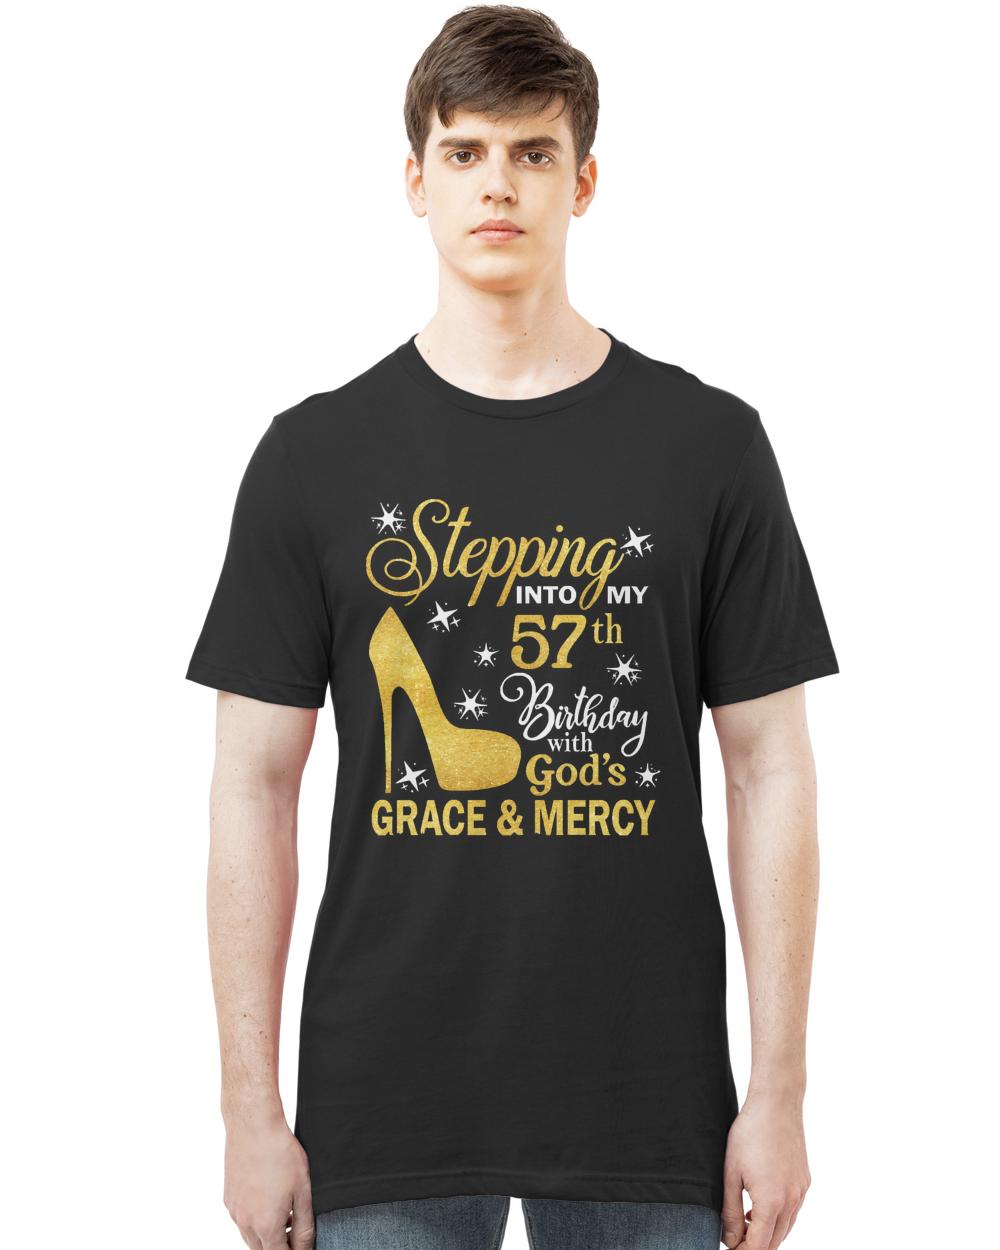 57th Birthday T-ShirtStepping Into My 57th Birthday With God's Grace & Mercy Bday T-Shirt (3)